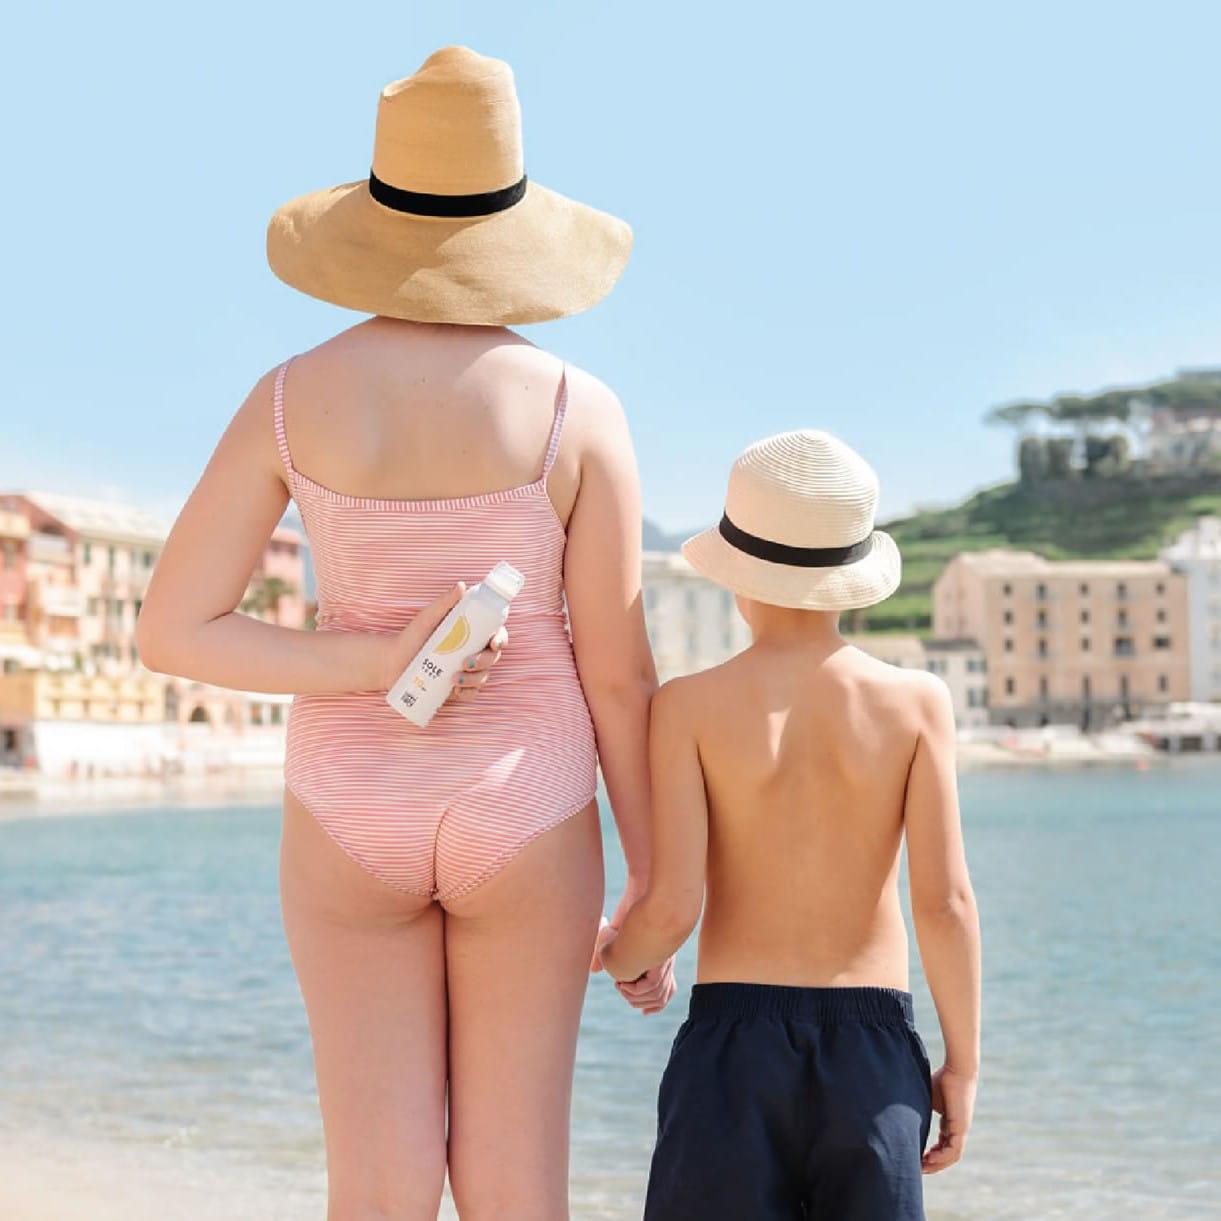 LINEA MAMMABABY: SOLE MAMMA SPF 30+ Αντηλιακό γαλάκτωμα για τις μαμάδες